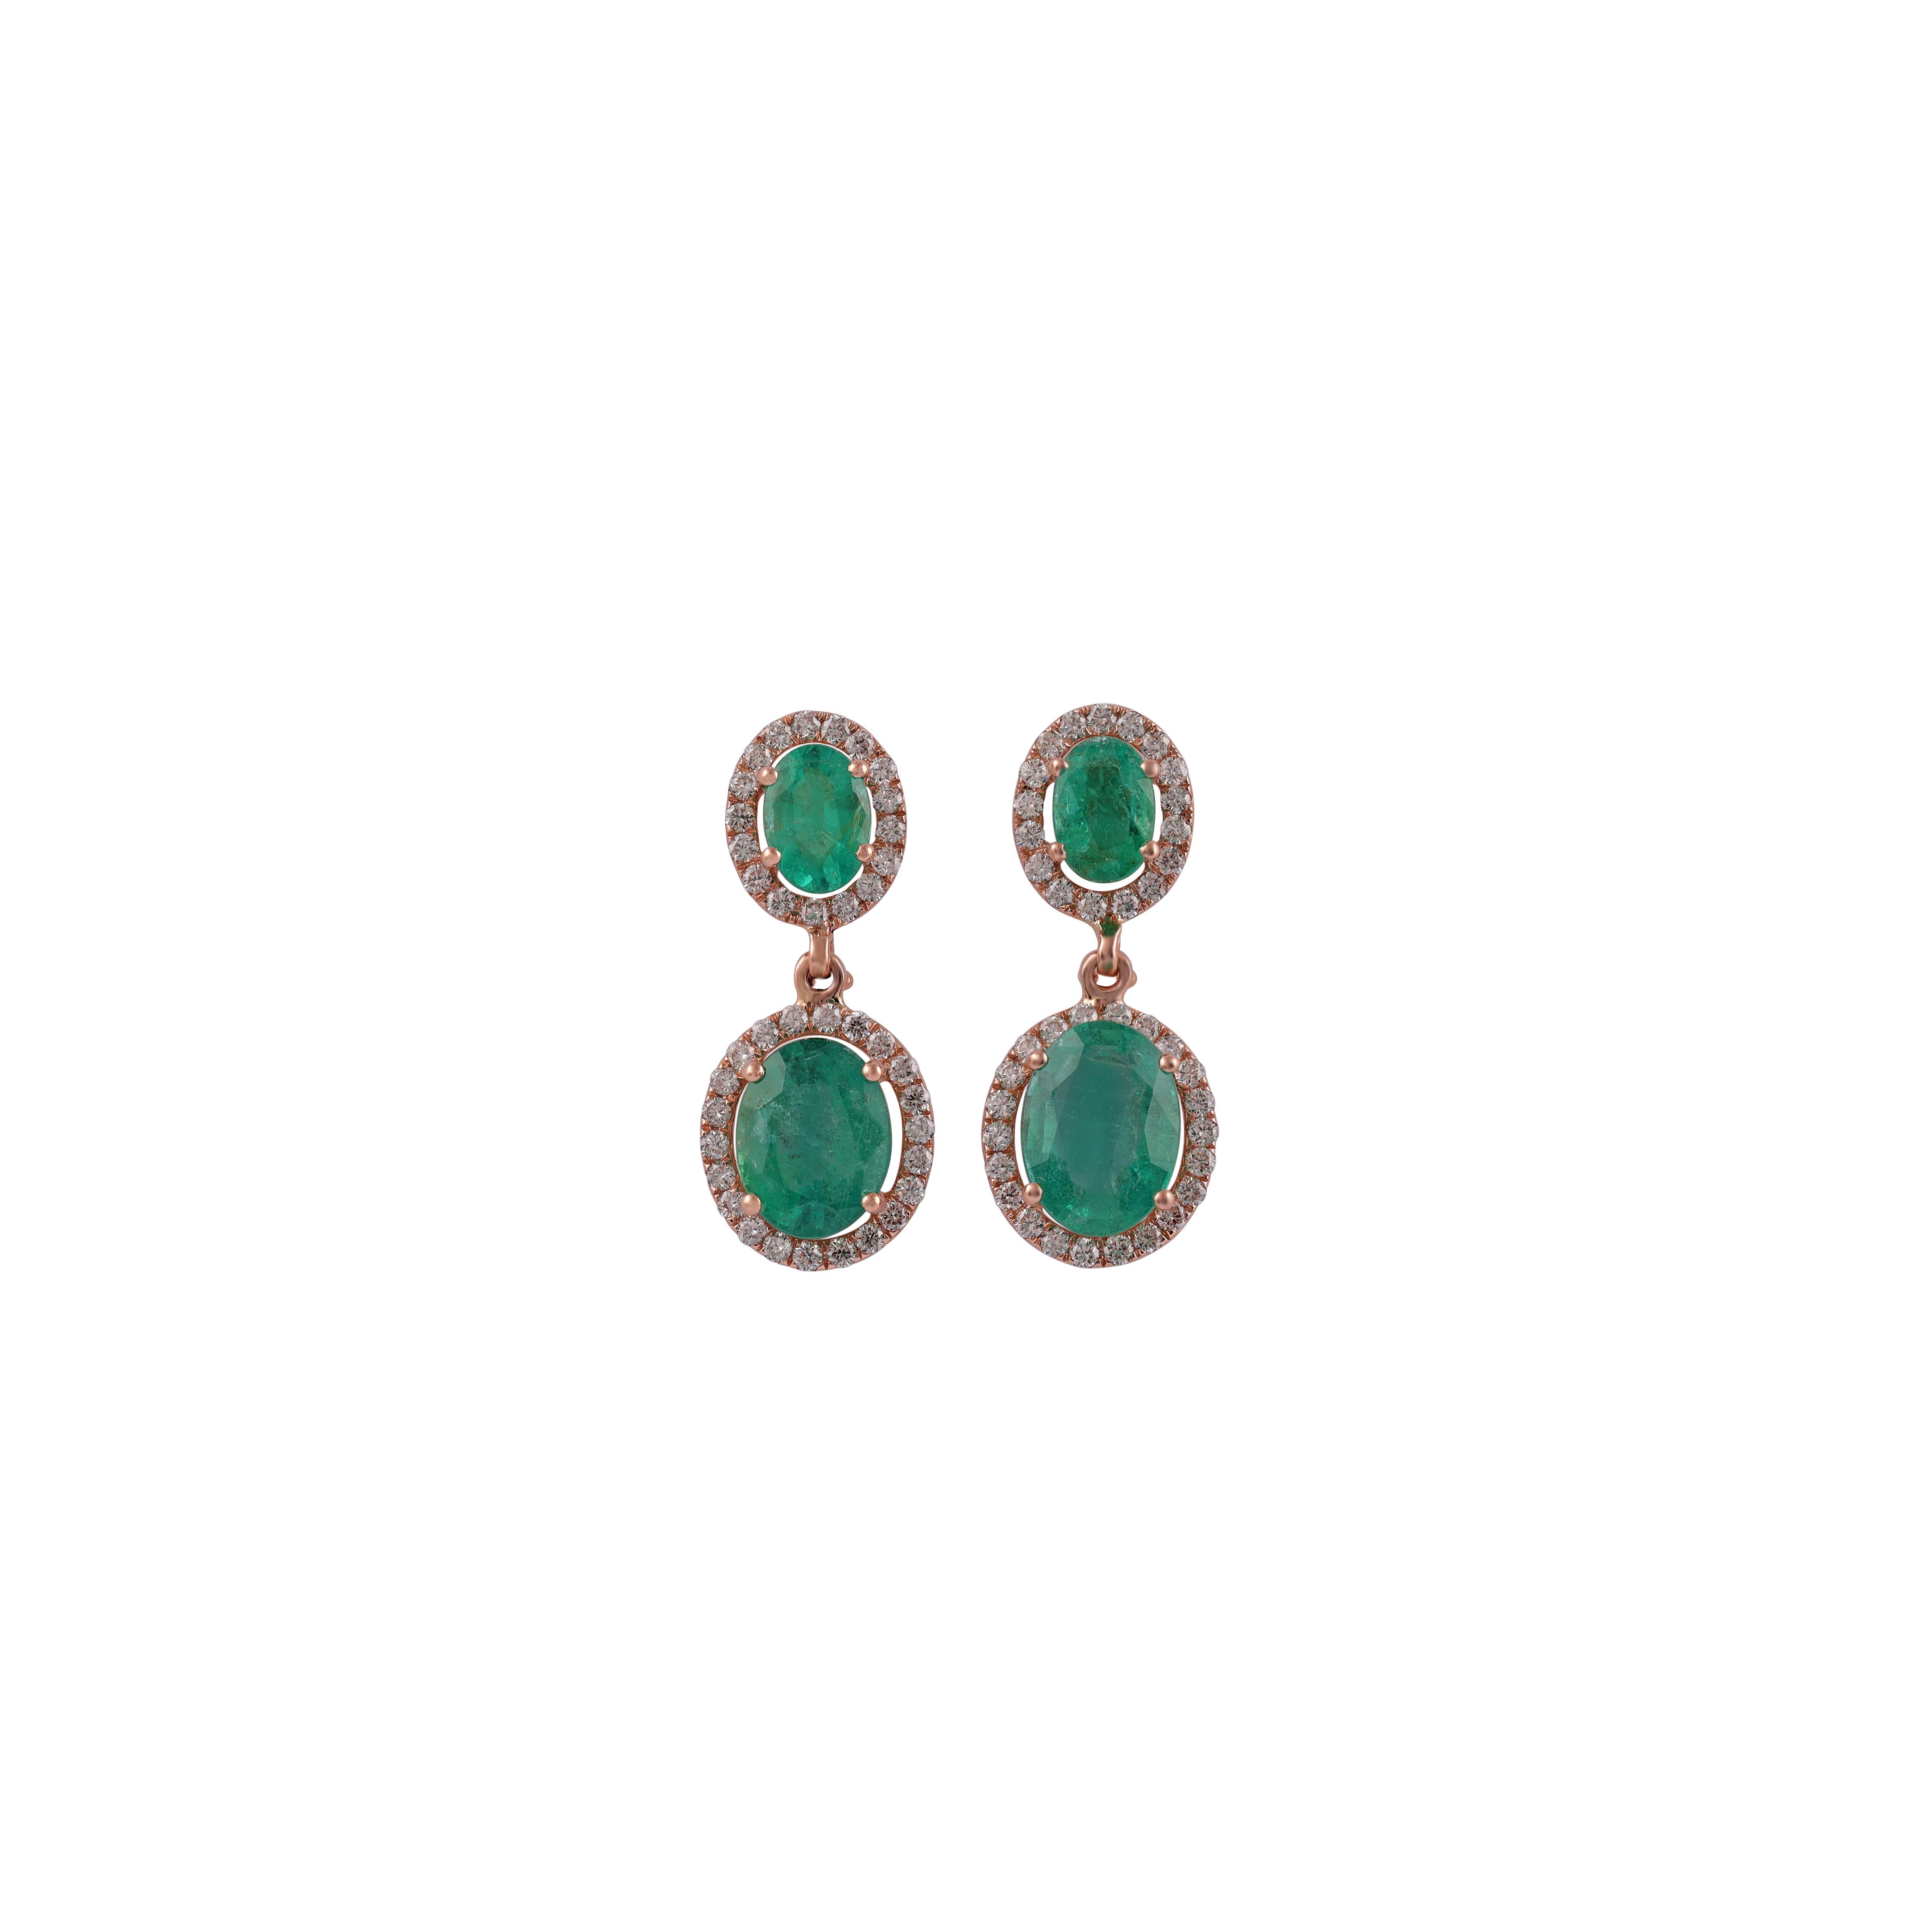 Magnificent Zambian  Emerald Stud Earrings
Zambian  Emerald approx. 2.46 CTS
18k Gold mounting 3.75 Gms
Diamond 0.62 Cts


Custom Services
Request Customization